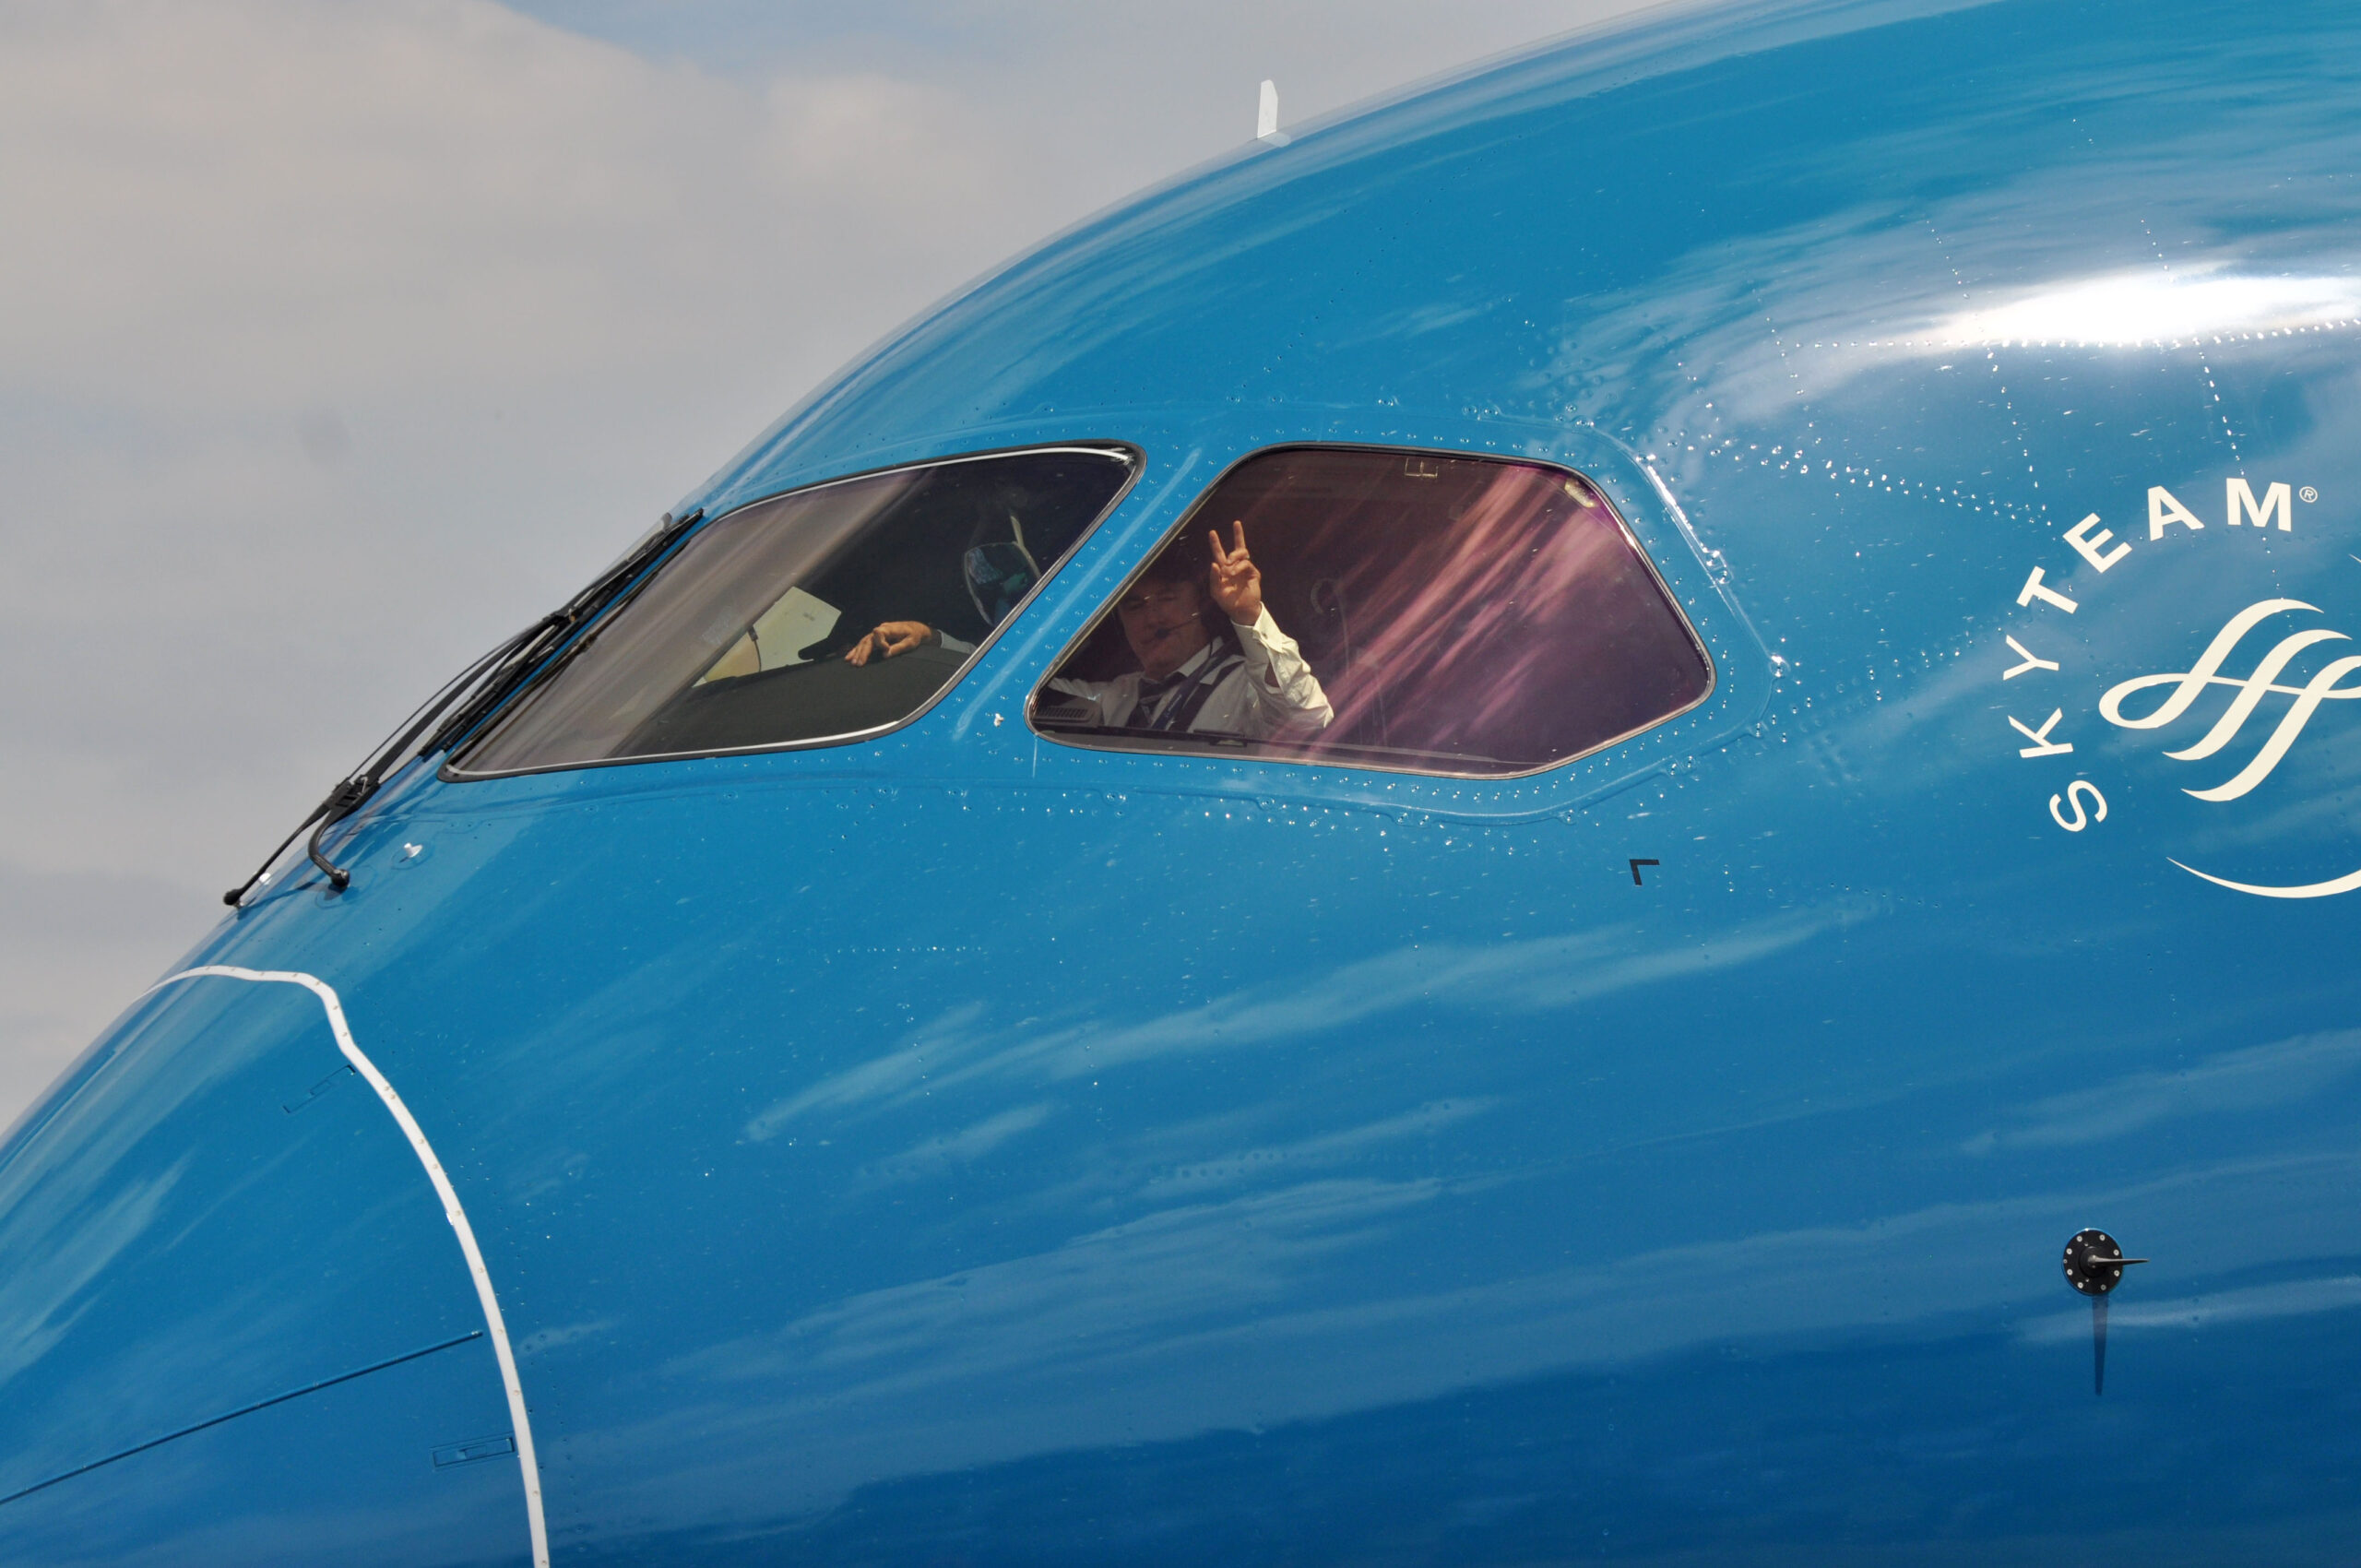 Vietnam Airlines Upgrades London Heathrow to Daily